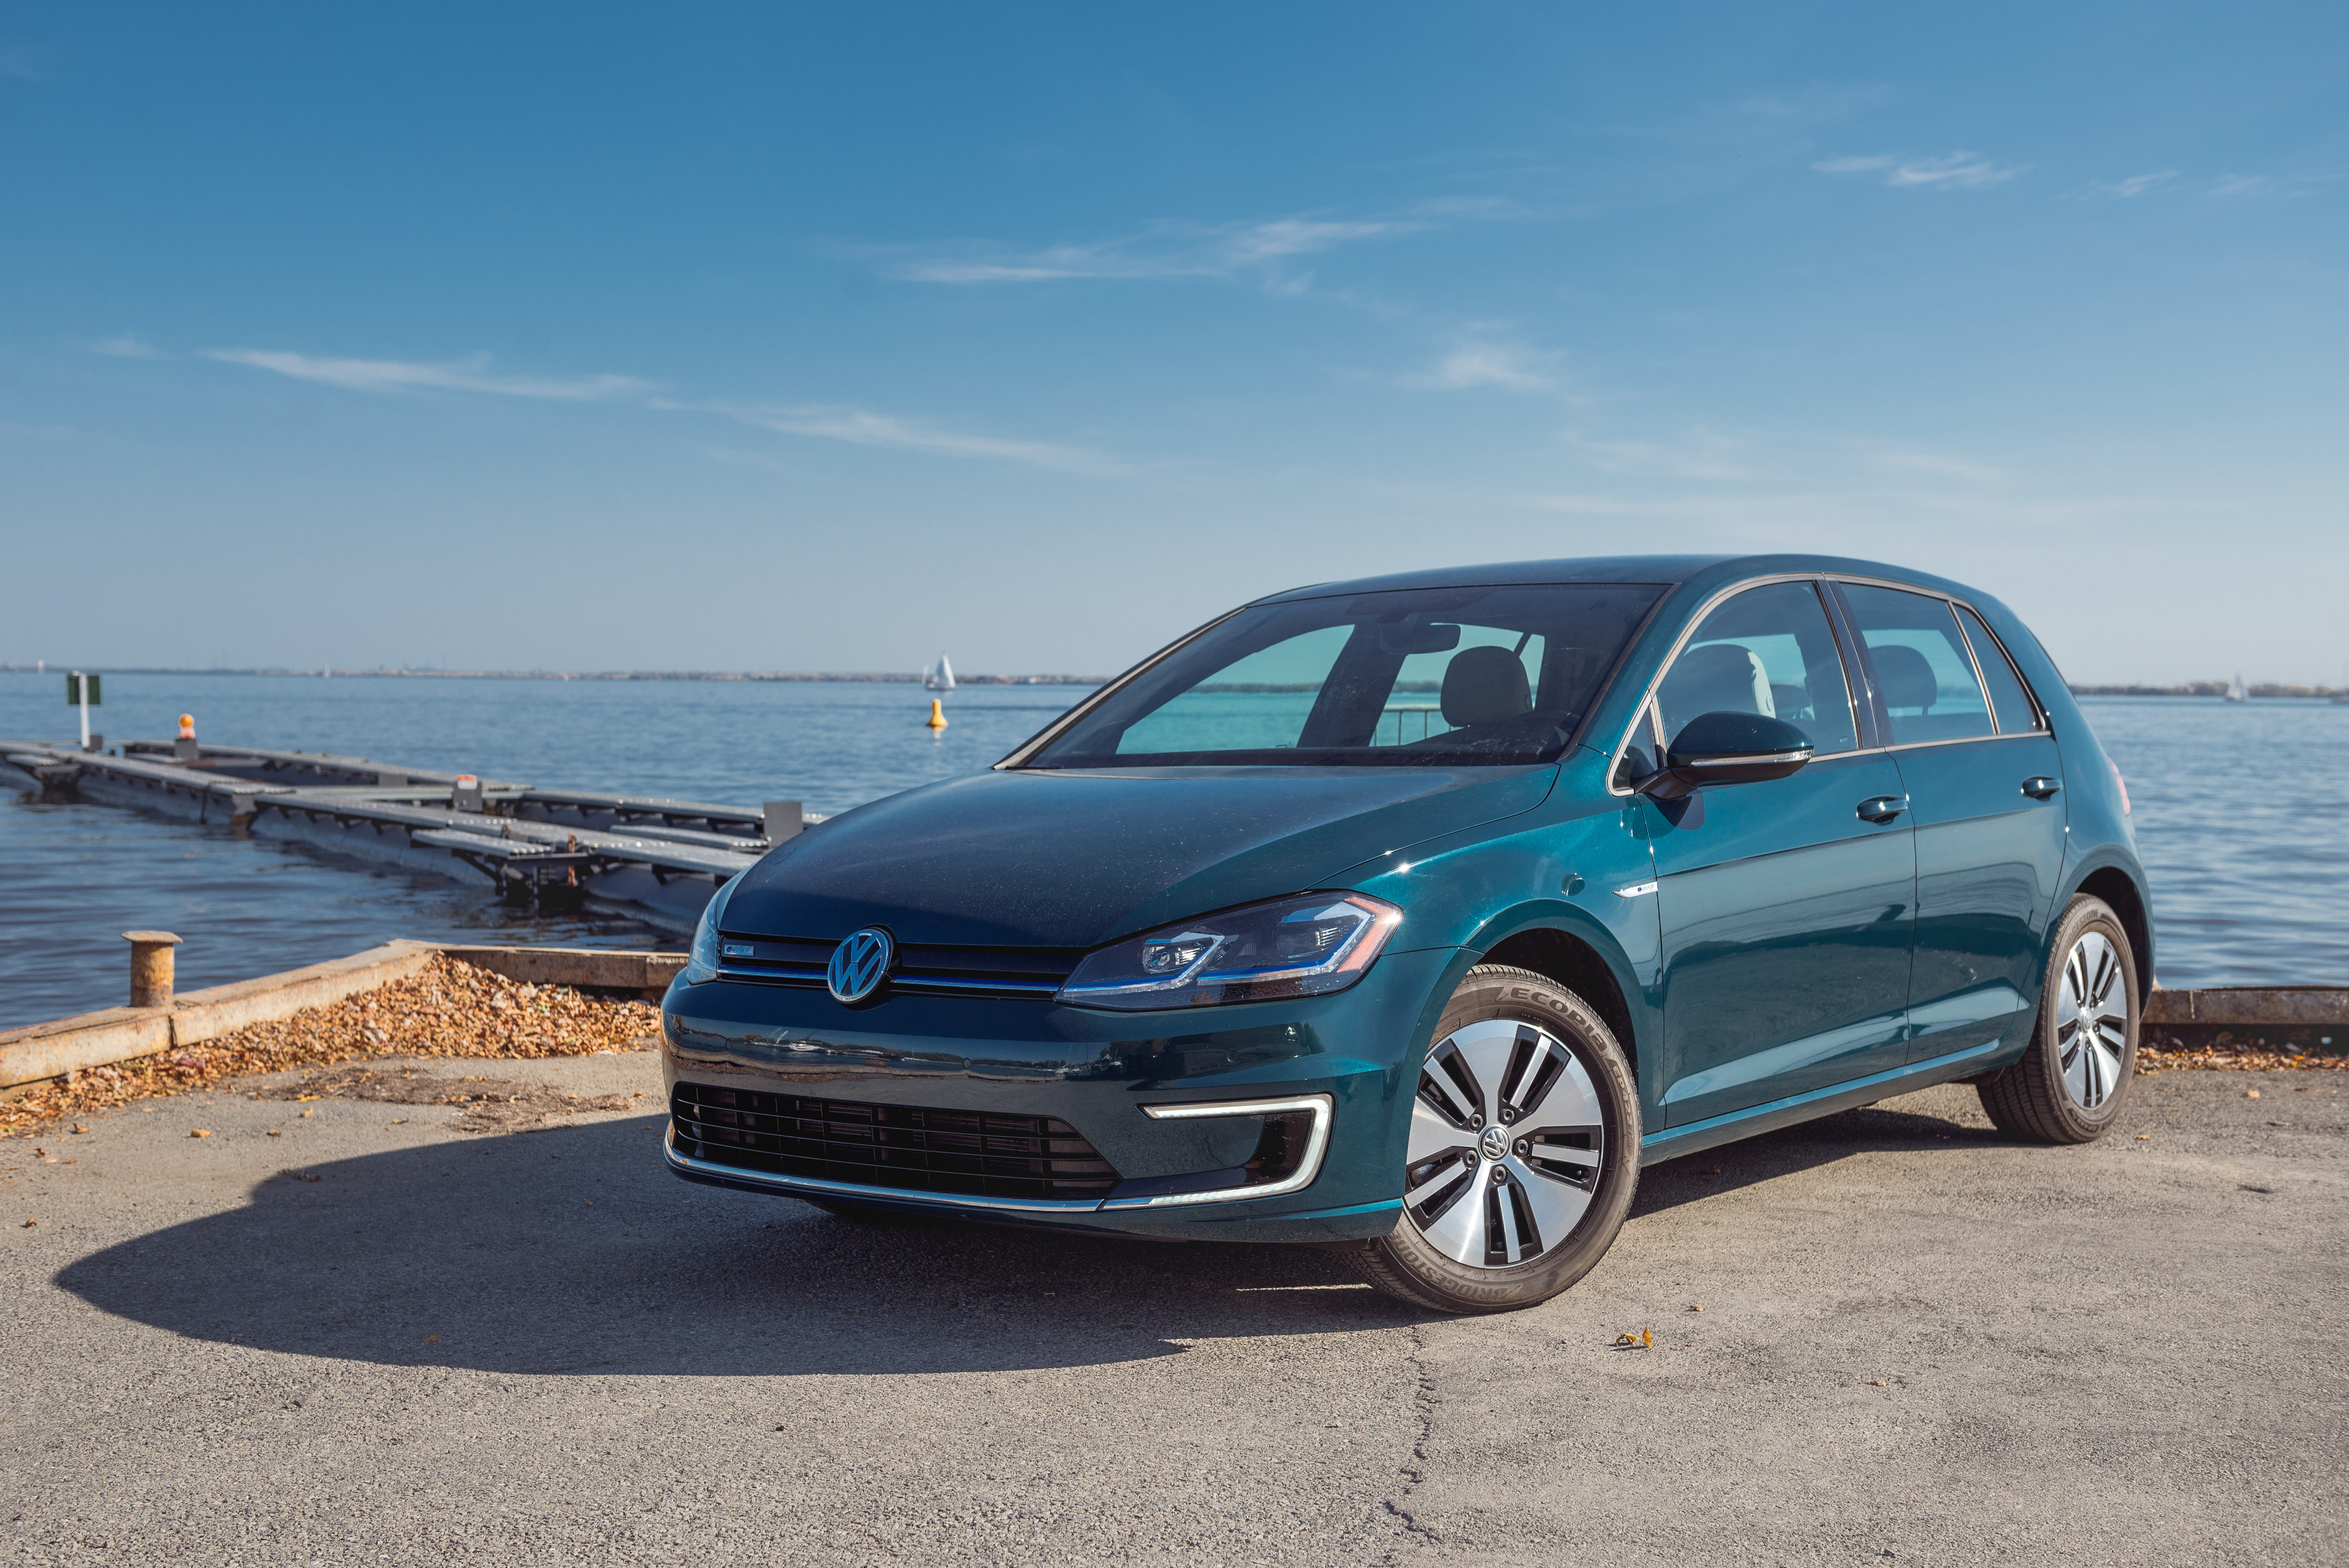 stenografi Krigsfanger Genbruge Here's Why The 2018 Volkswagen E-Golf Is The Best EV You Can Buy